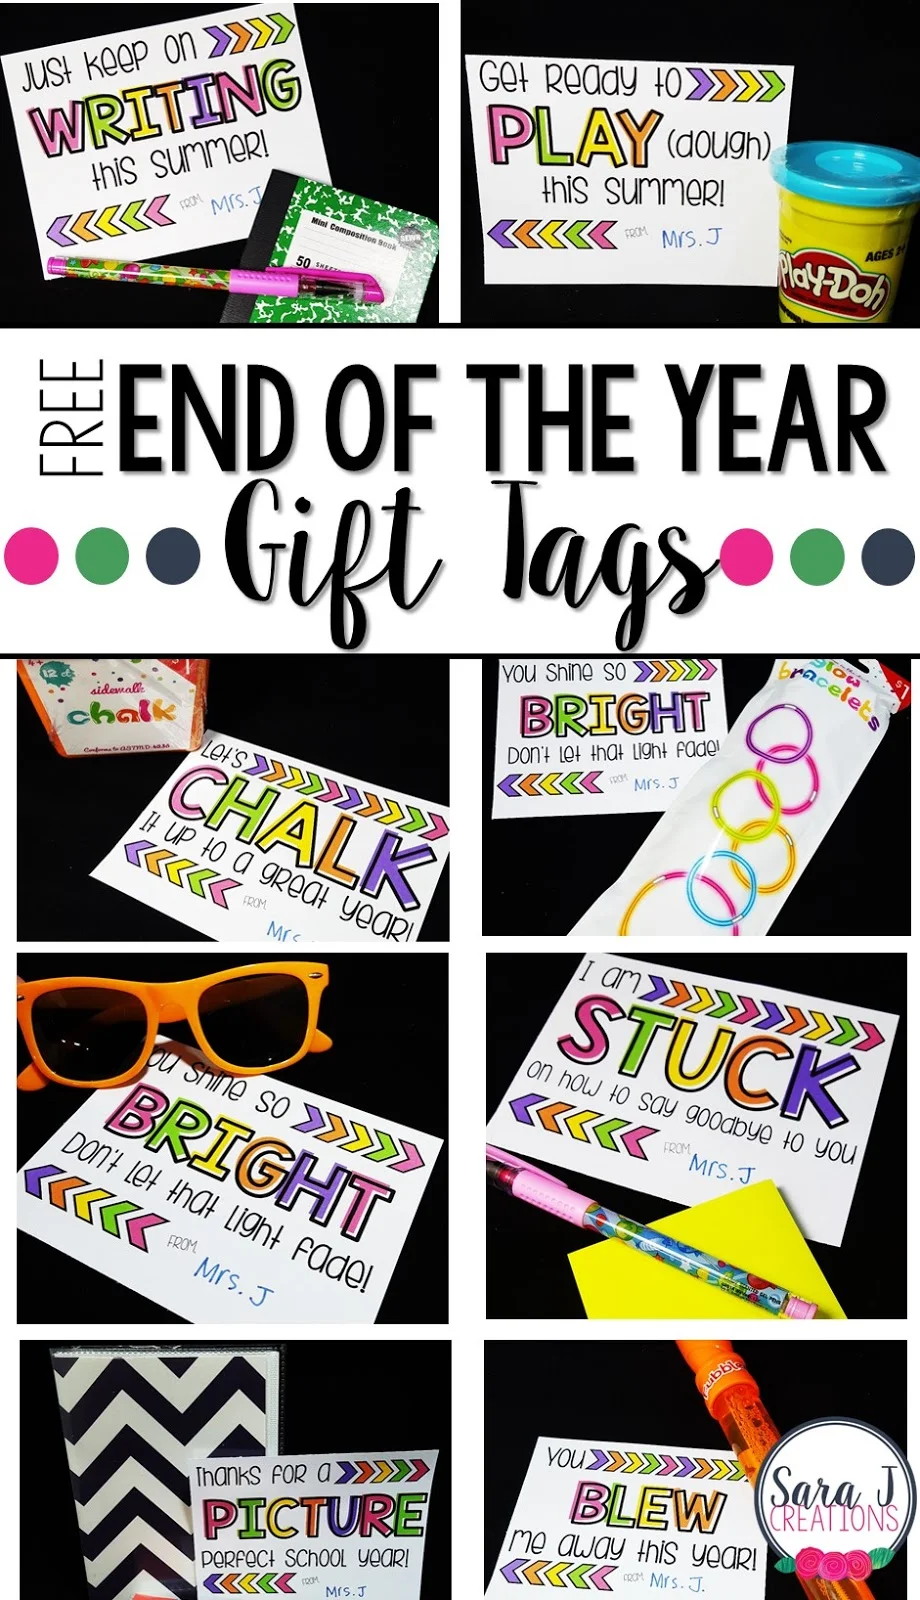 10 FREE Gift Tags for end of the school year student gifts and gift ideas that won't break the bank for the teacher.